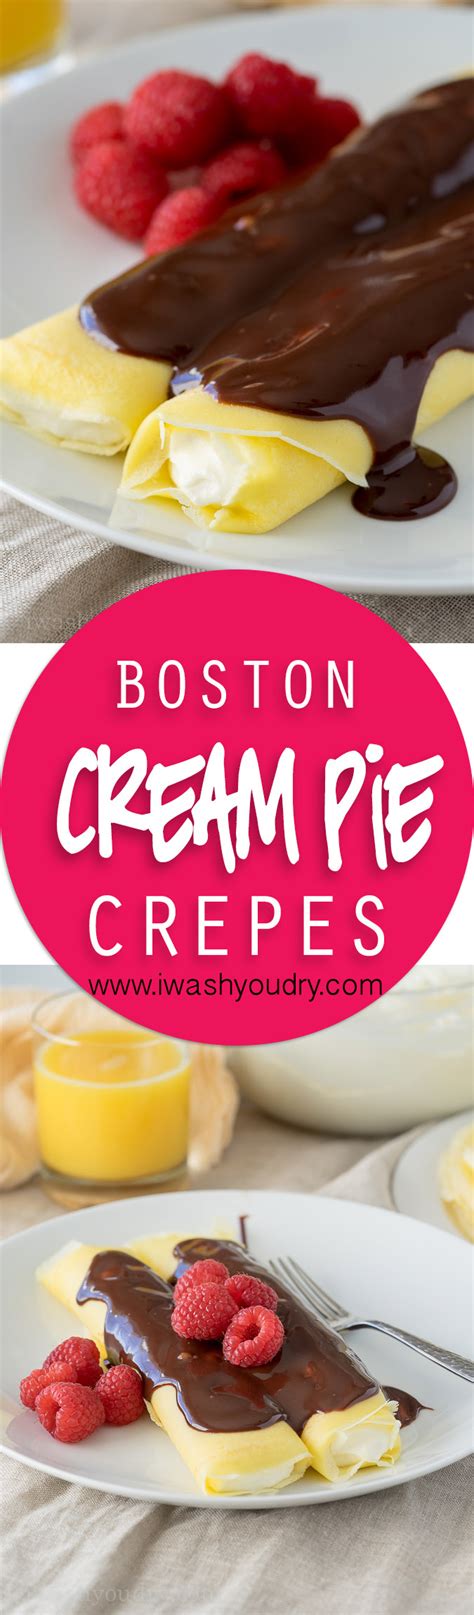 Boston cream pie is essentially a giant chocolate èclair, except with a sponge cake instead of choux pastry. Boston Cream Pie Crepes - I Wash... You Dry